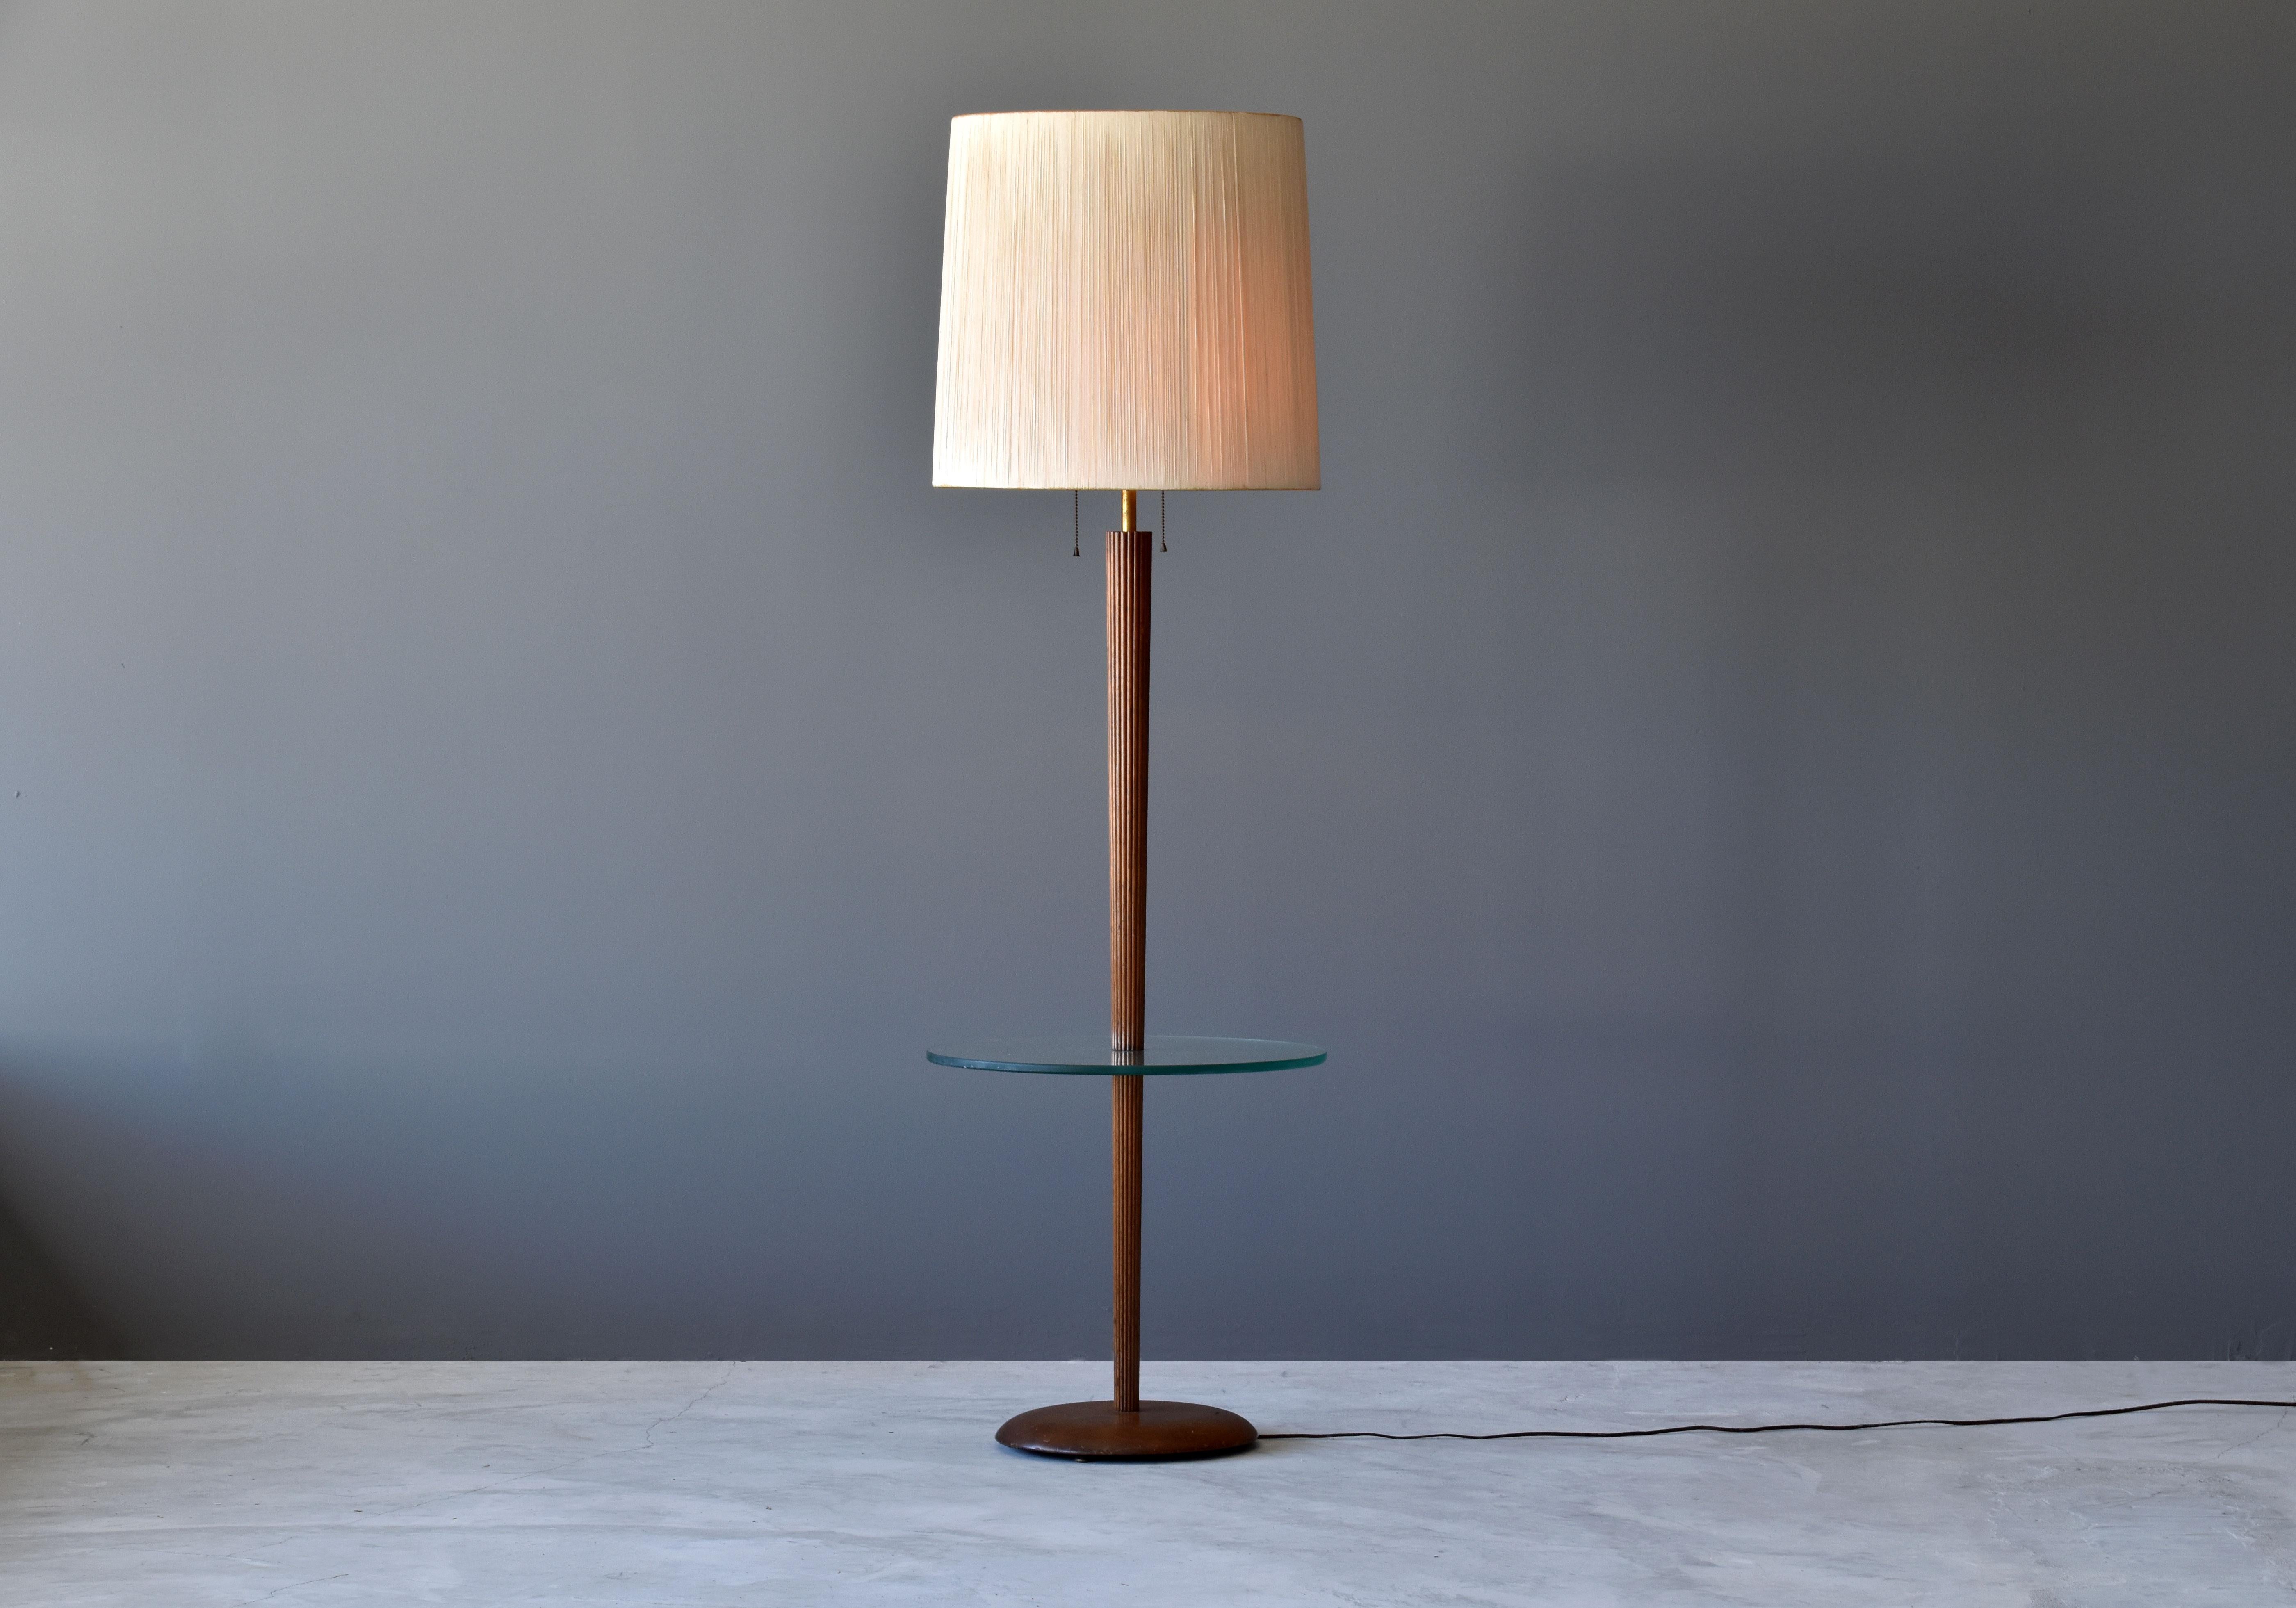 A rare and possibly unique floor lamp with a built-in side table designed by Vladimir Kagan. Produced by Kagan-Dreyfus in New York, circa 1960s. 

The rod and base are finely carved walnut and a mounted modernist glass disk serving as a side